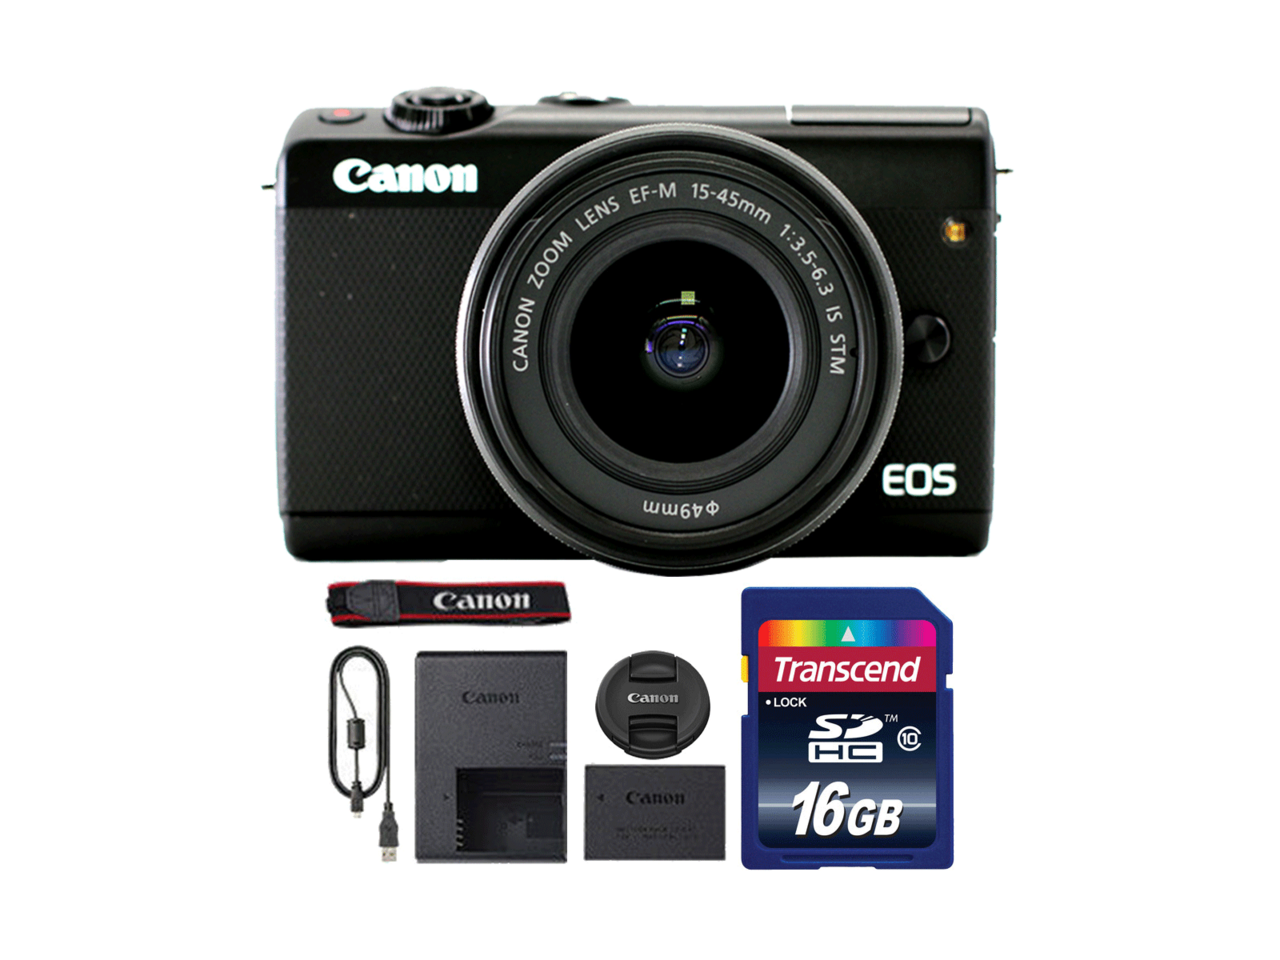 Canon EOS M100 Mirrorless Digital Camera with 15-45mm Lens and 16GB Memory Card